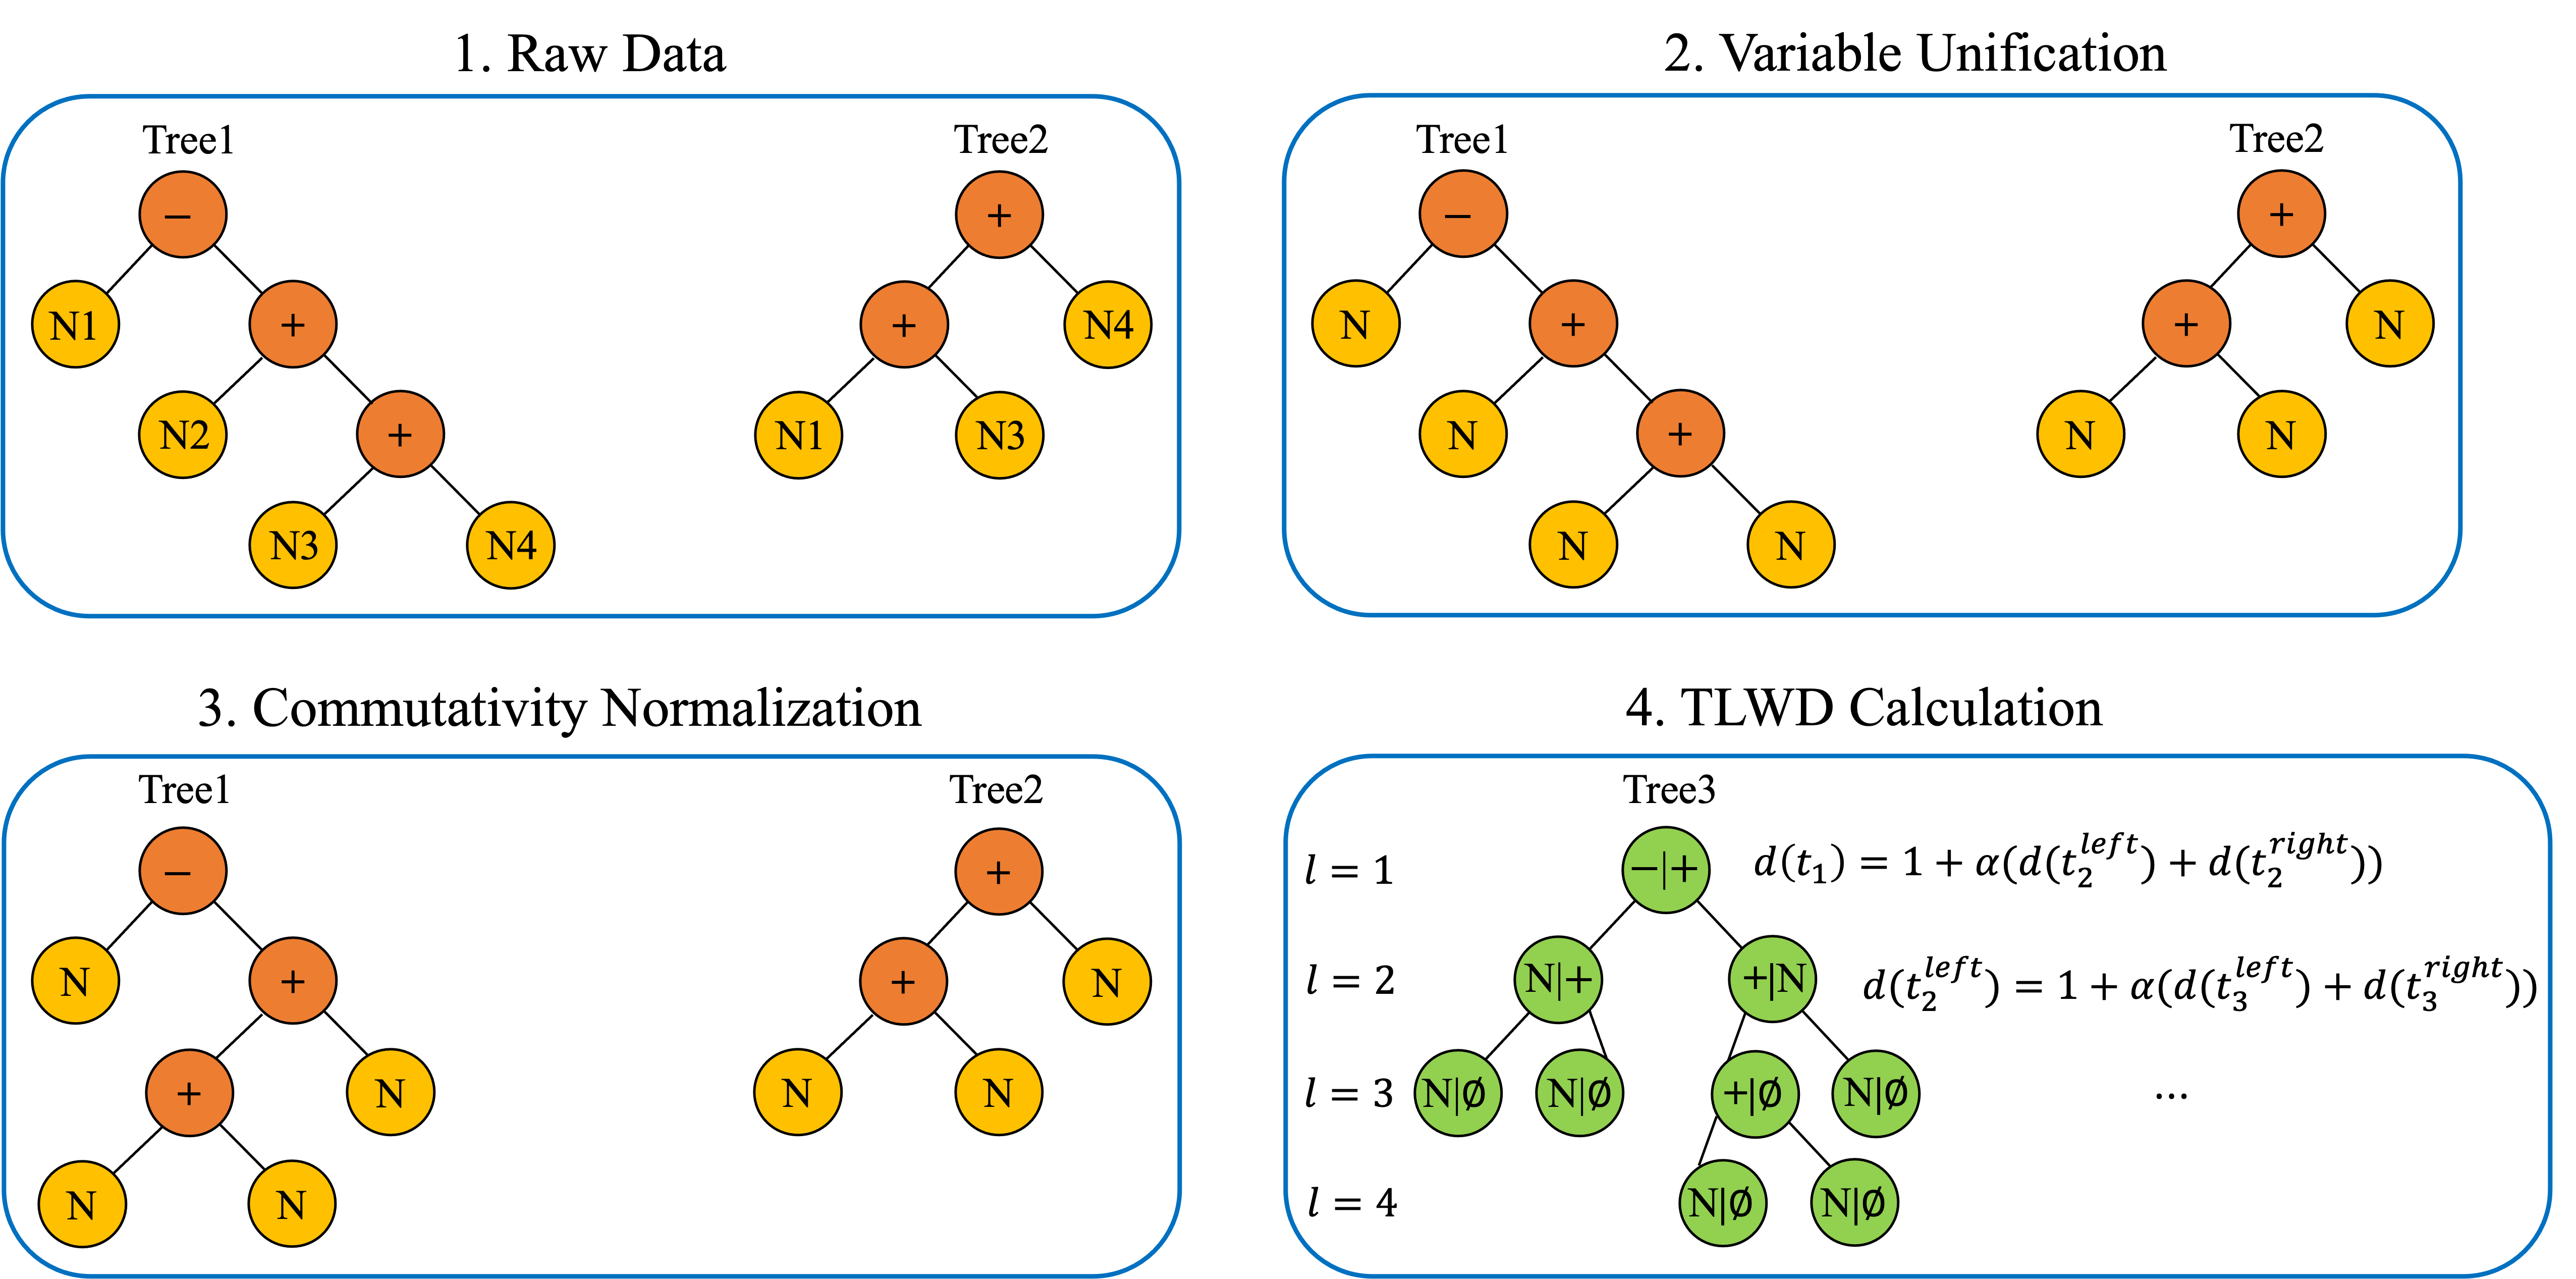 This figure provides an overview of the Tree Level Weighted Distance (TLWD) calculation procedure, which is divided into four steps: 1. Raw Data, 2. Variable Unification, 3. Commutativity Normalization, and 4. TLWD Calculation. Step 1 shows two binary equation trees, representing the initial state. Step 2 displays the same trees with some nodes unified under a common label 'N'. In Step 3, further normalization is applied, with some nodes' sub-trees are swapped. Step 4 illustrates the TLWD calculation on overlapped tree.